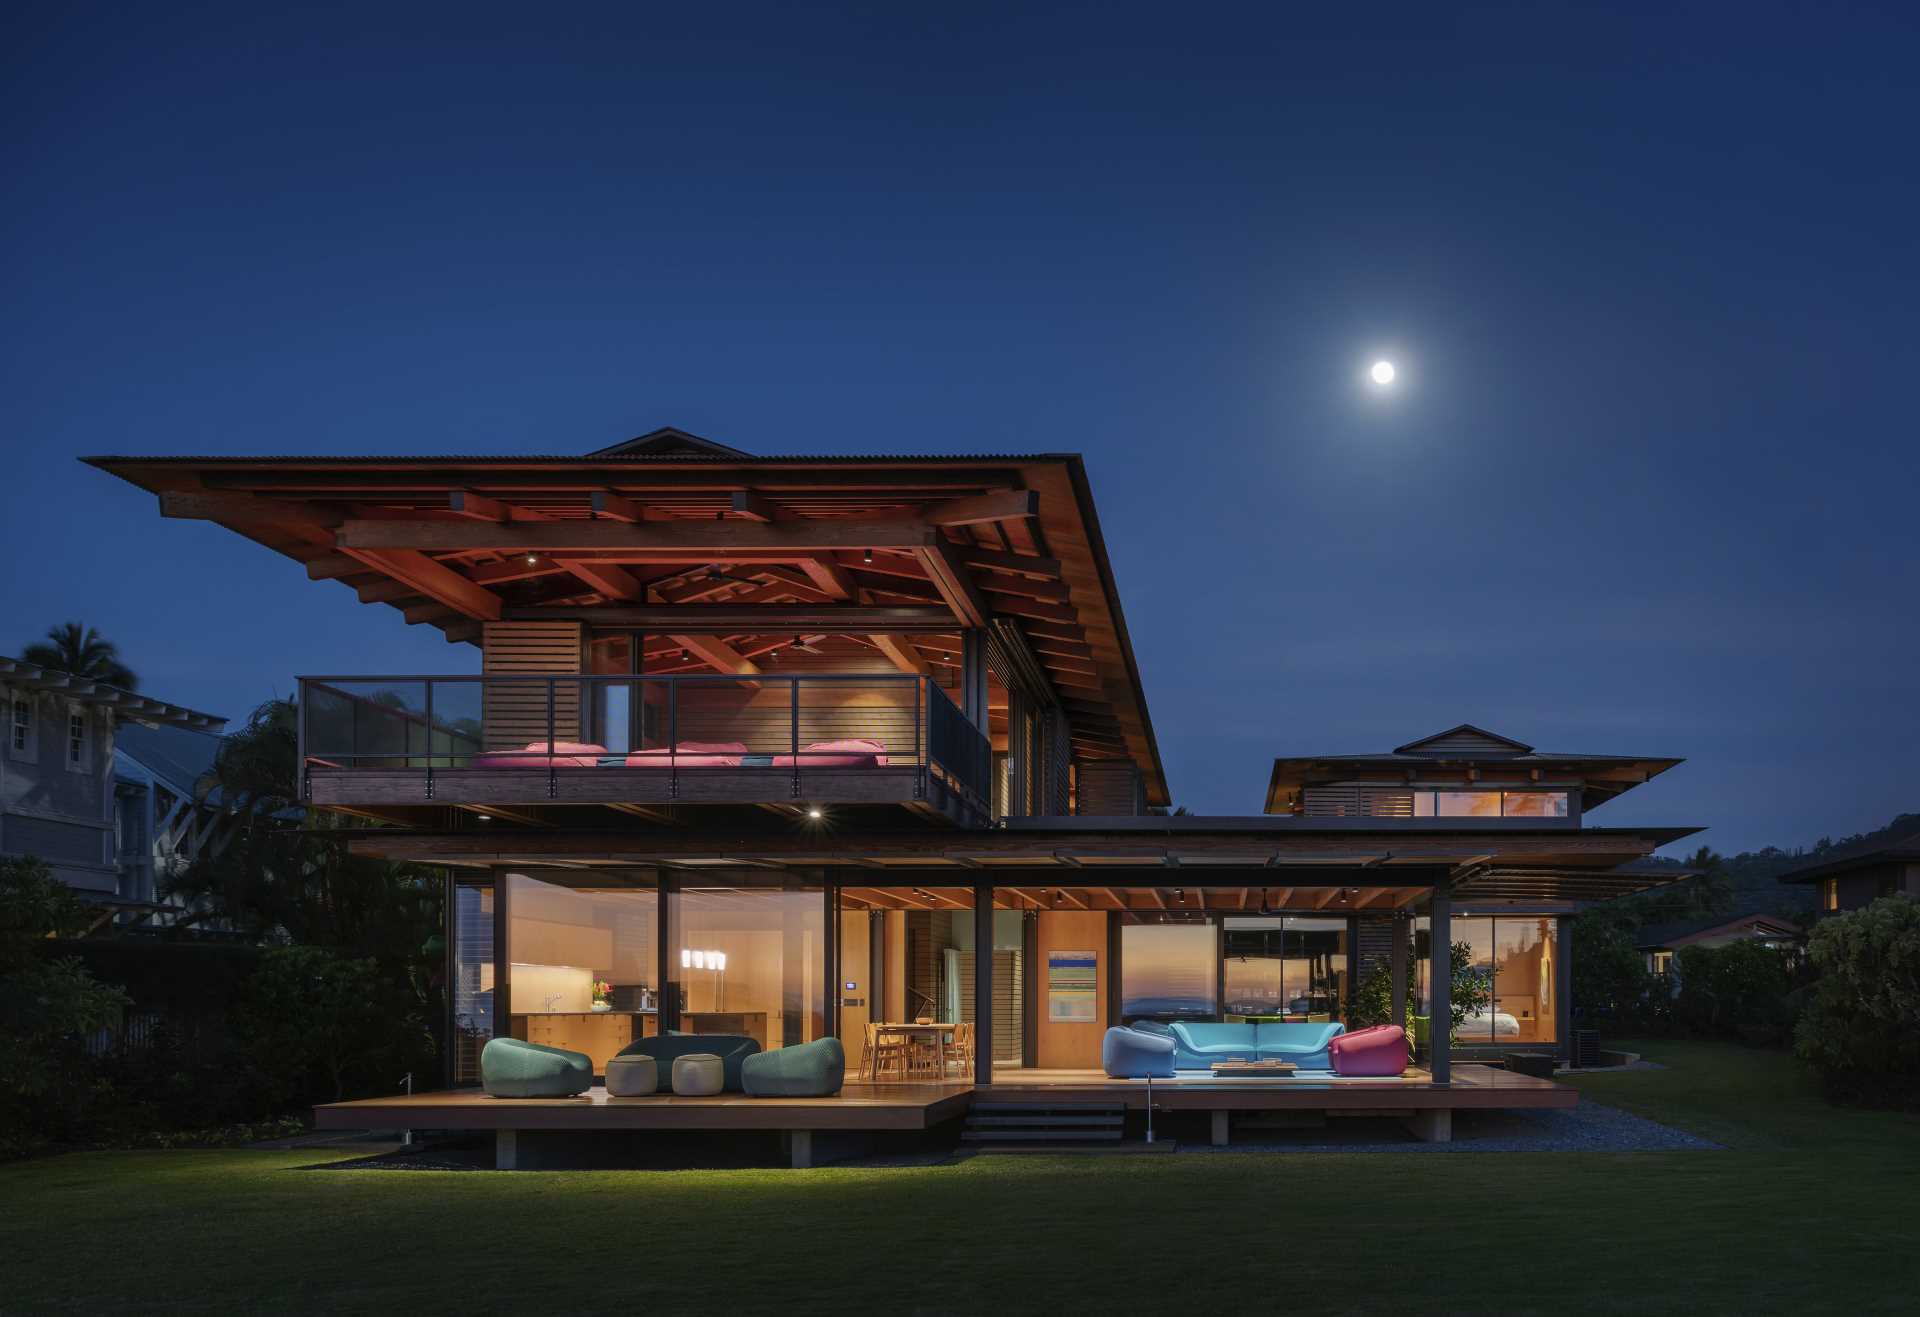 Wooden floors extend from the living room to an exterior lanai that floats like a raft above the landscape.